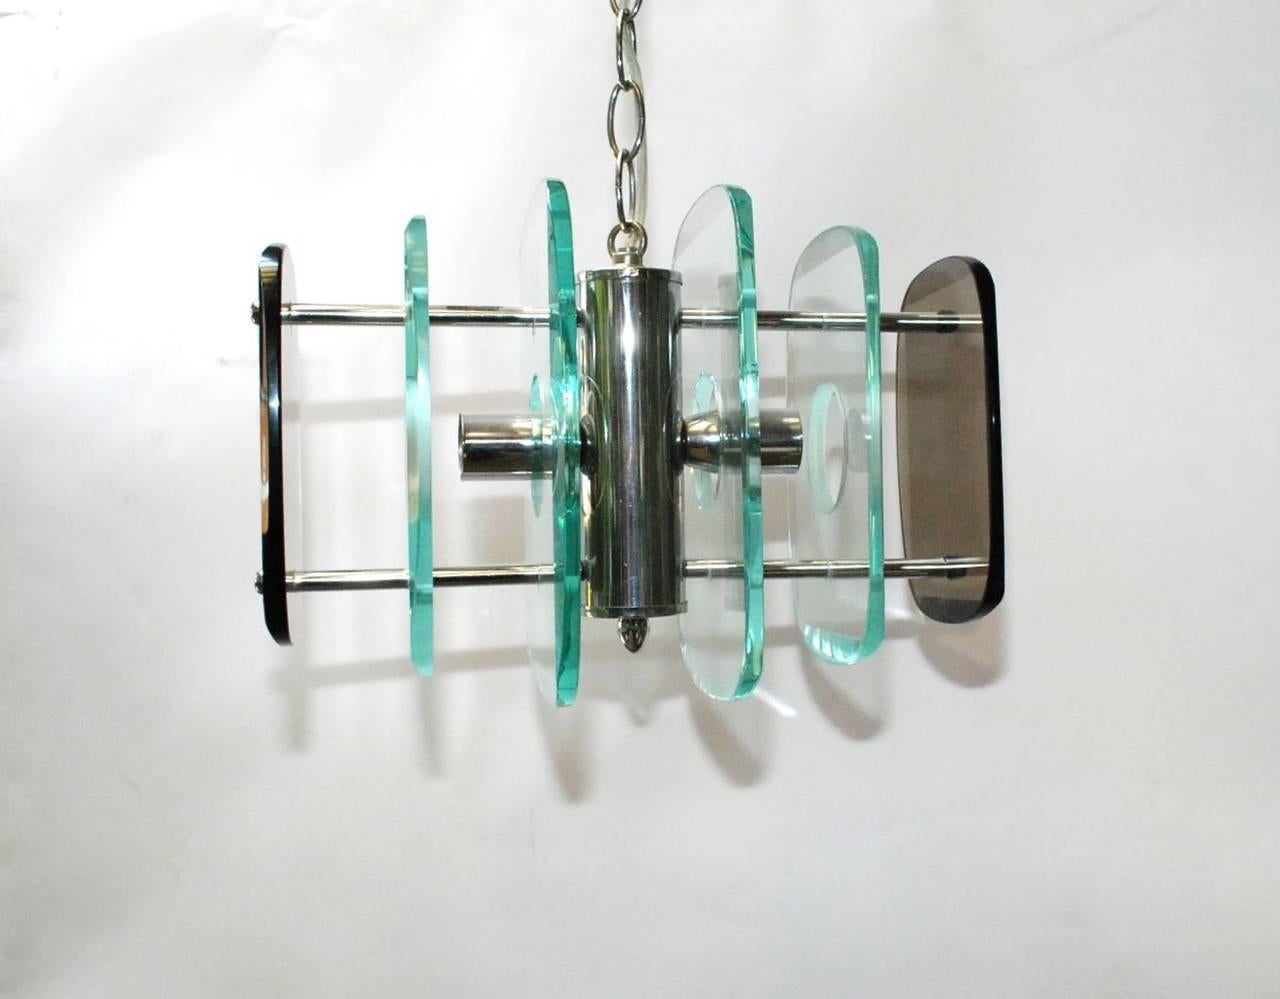 Vintage Italian pendant with clear and smoky beveled glass rectangular panels, mounted on chrome frame / In the style of Fontana Arte / Made in Italy circa 1960’s 
2 lights / E12 or E14 type / max 40W each
Height: 10 inches plus chain and canopy /